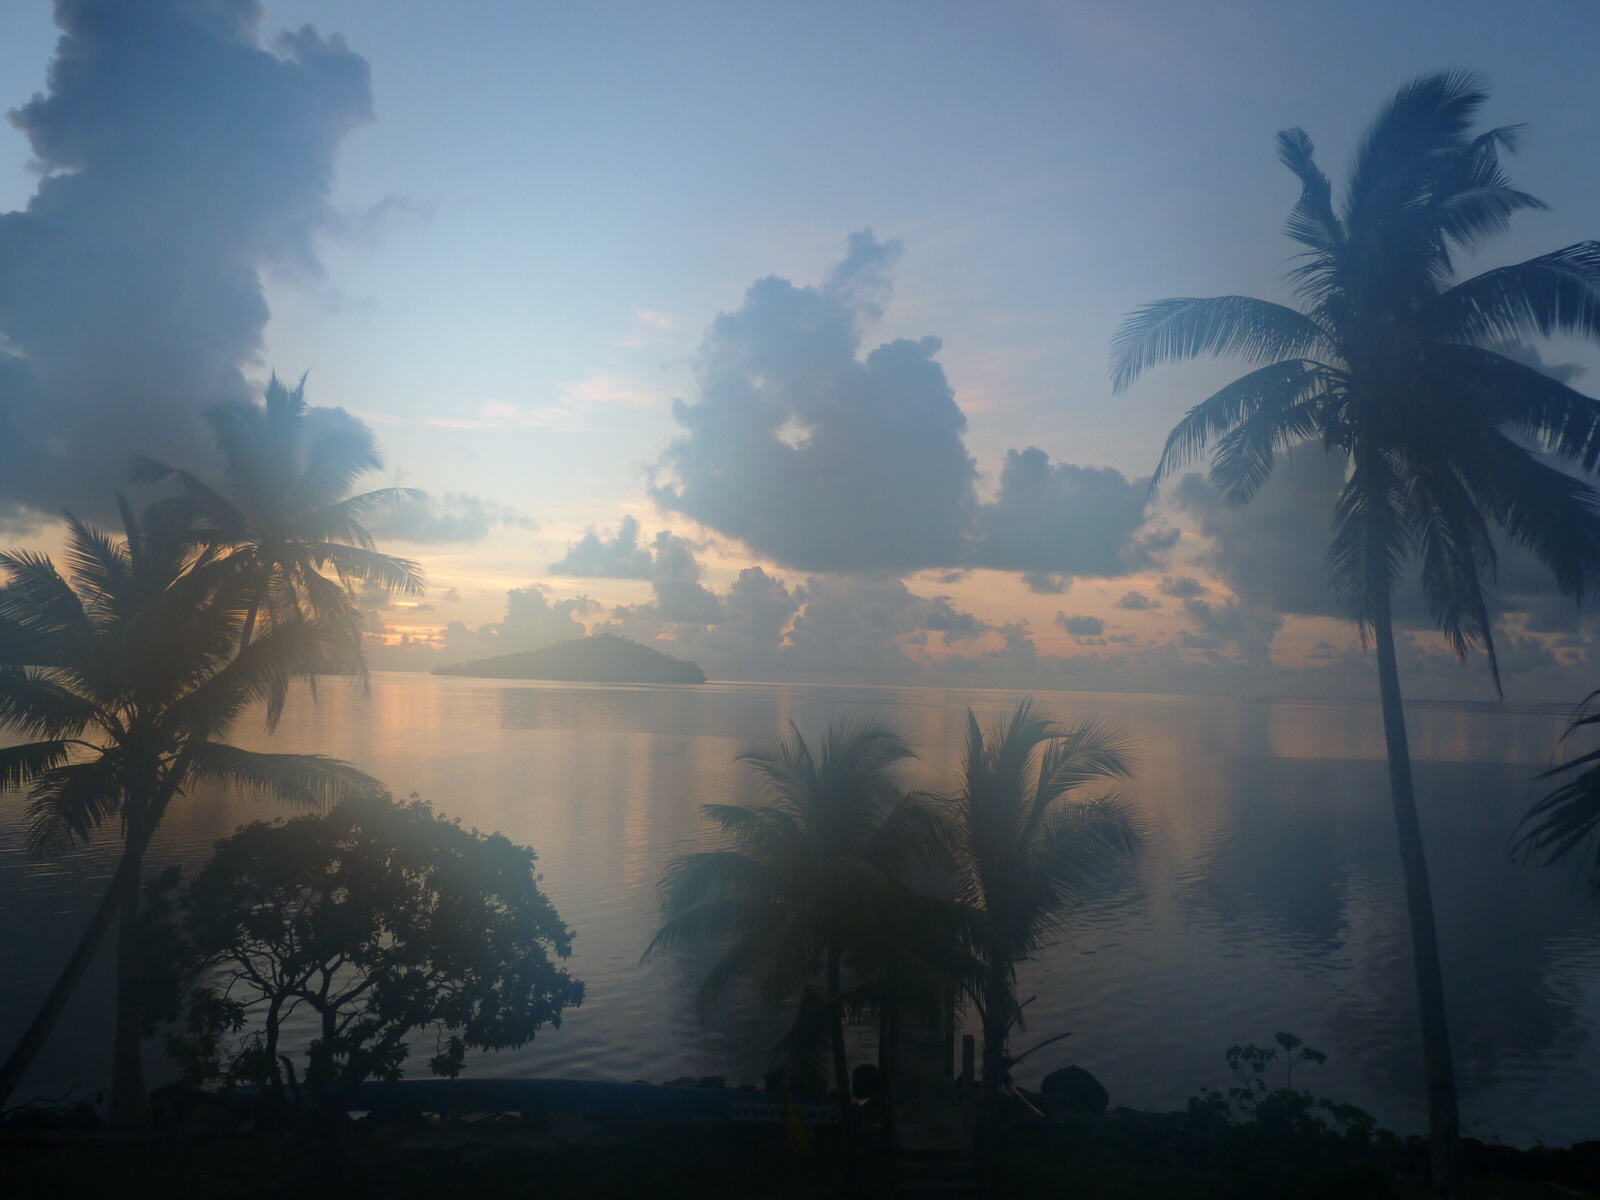 A misty morning on the seafront in Wallis island